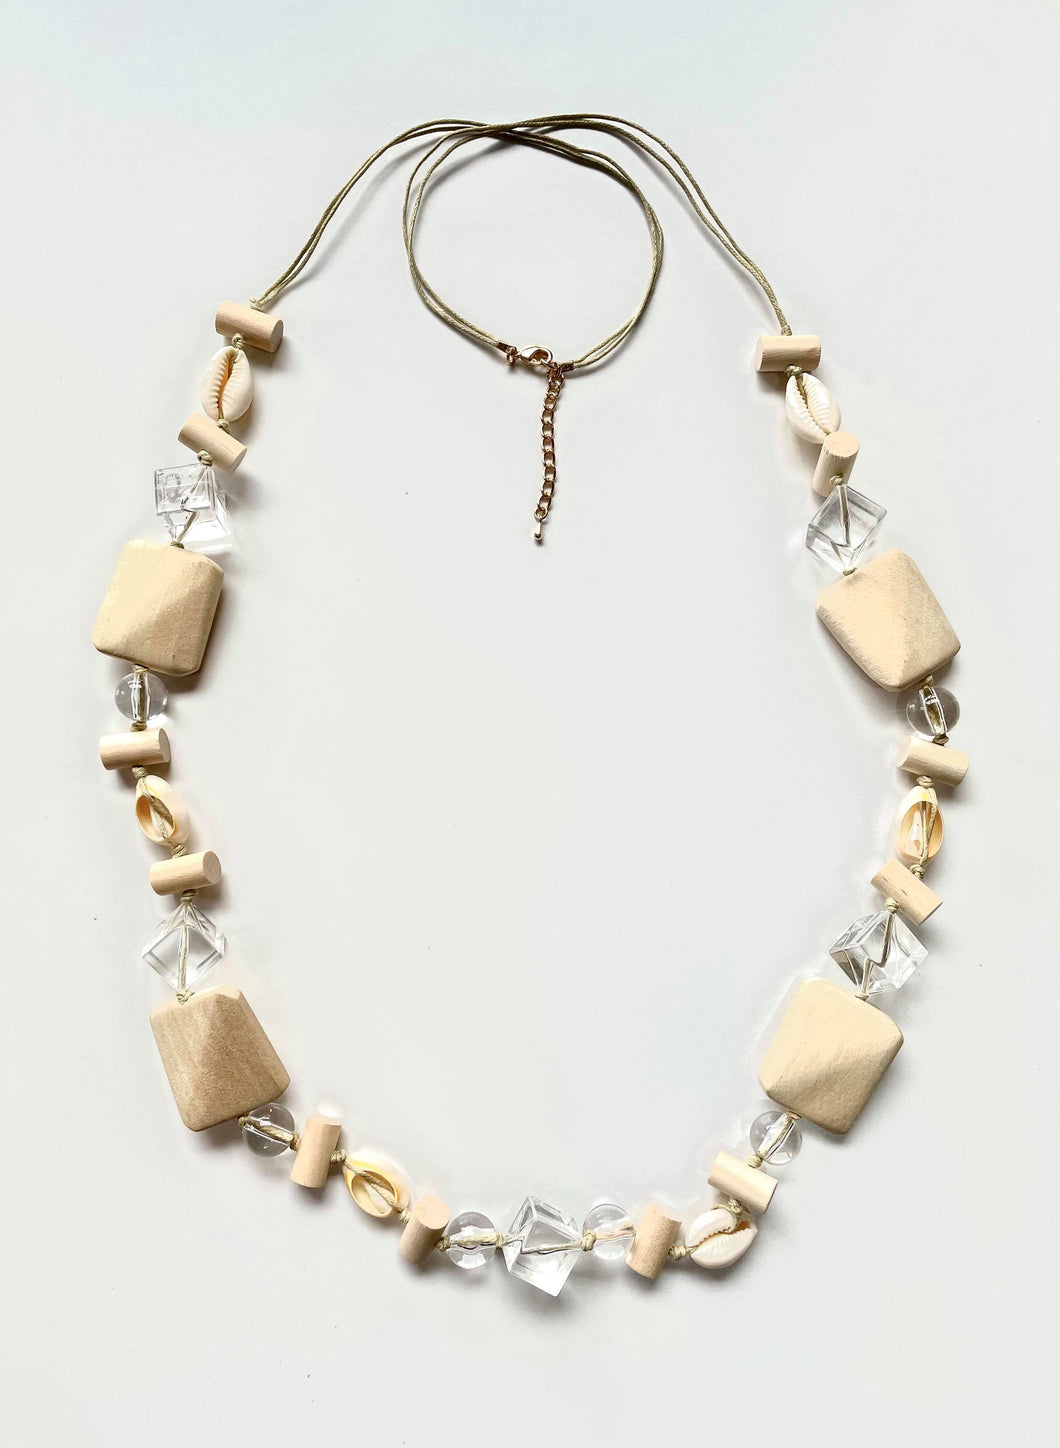 Natural Cord Necklace With Shells, Wooden Shapes & Acrylic Beads